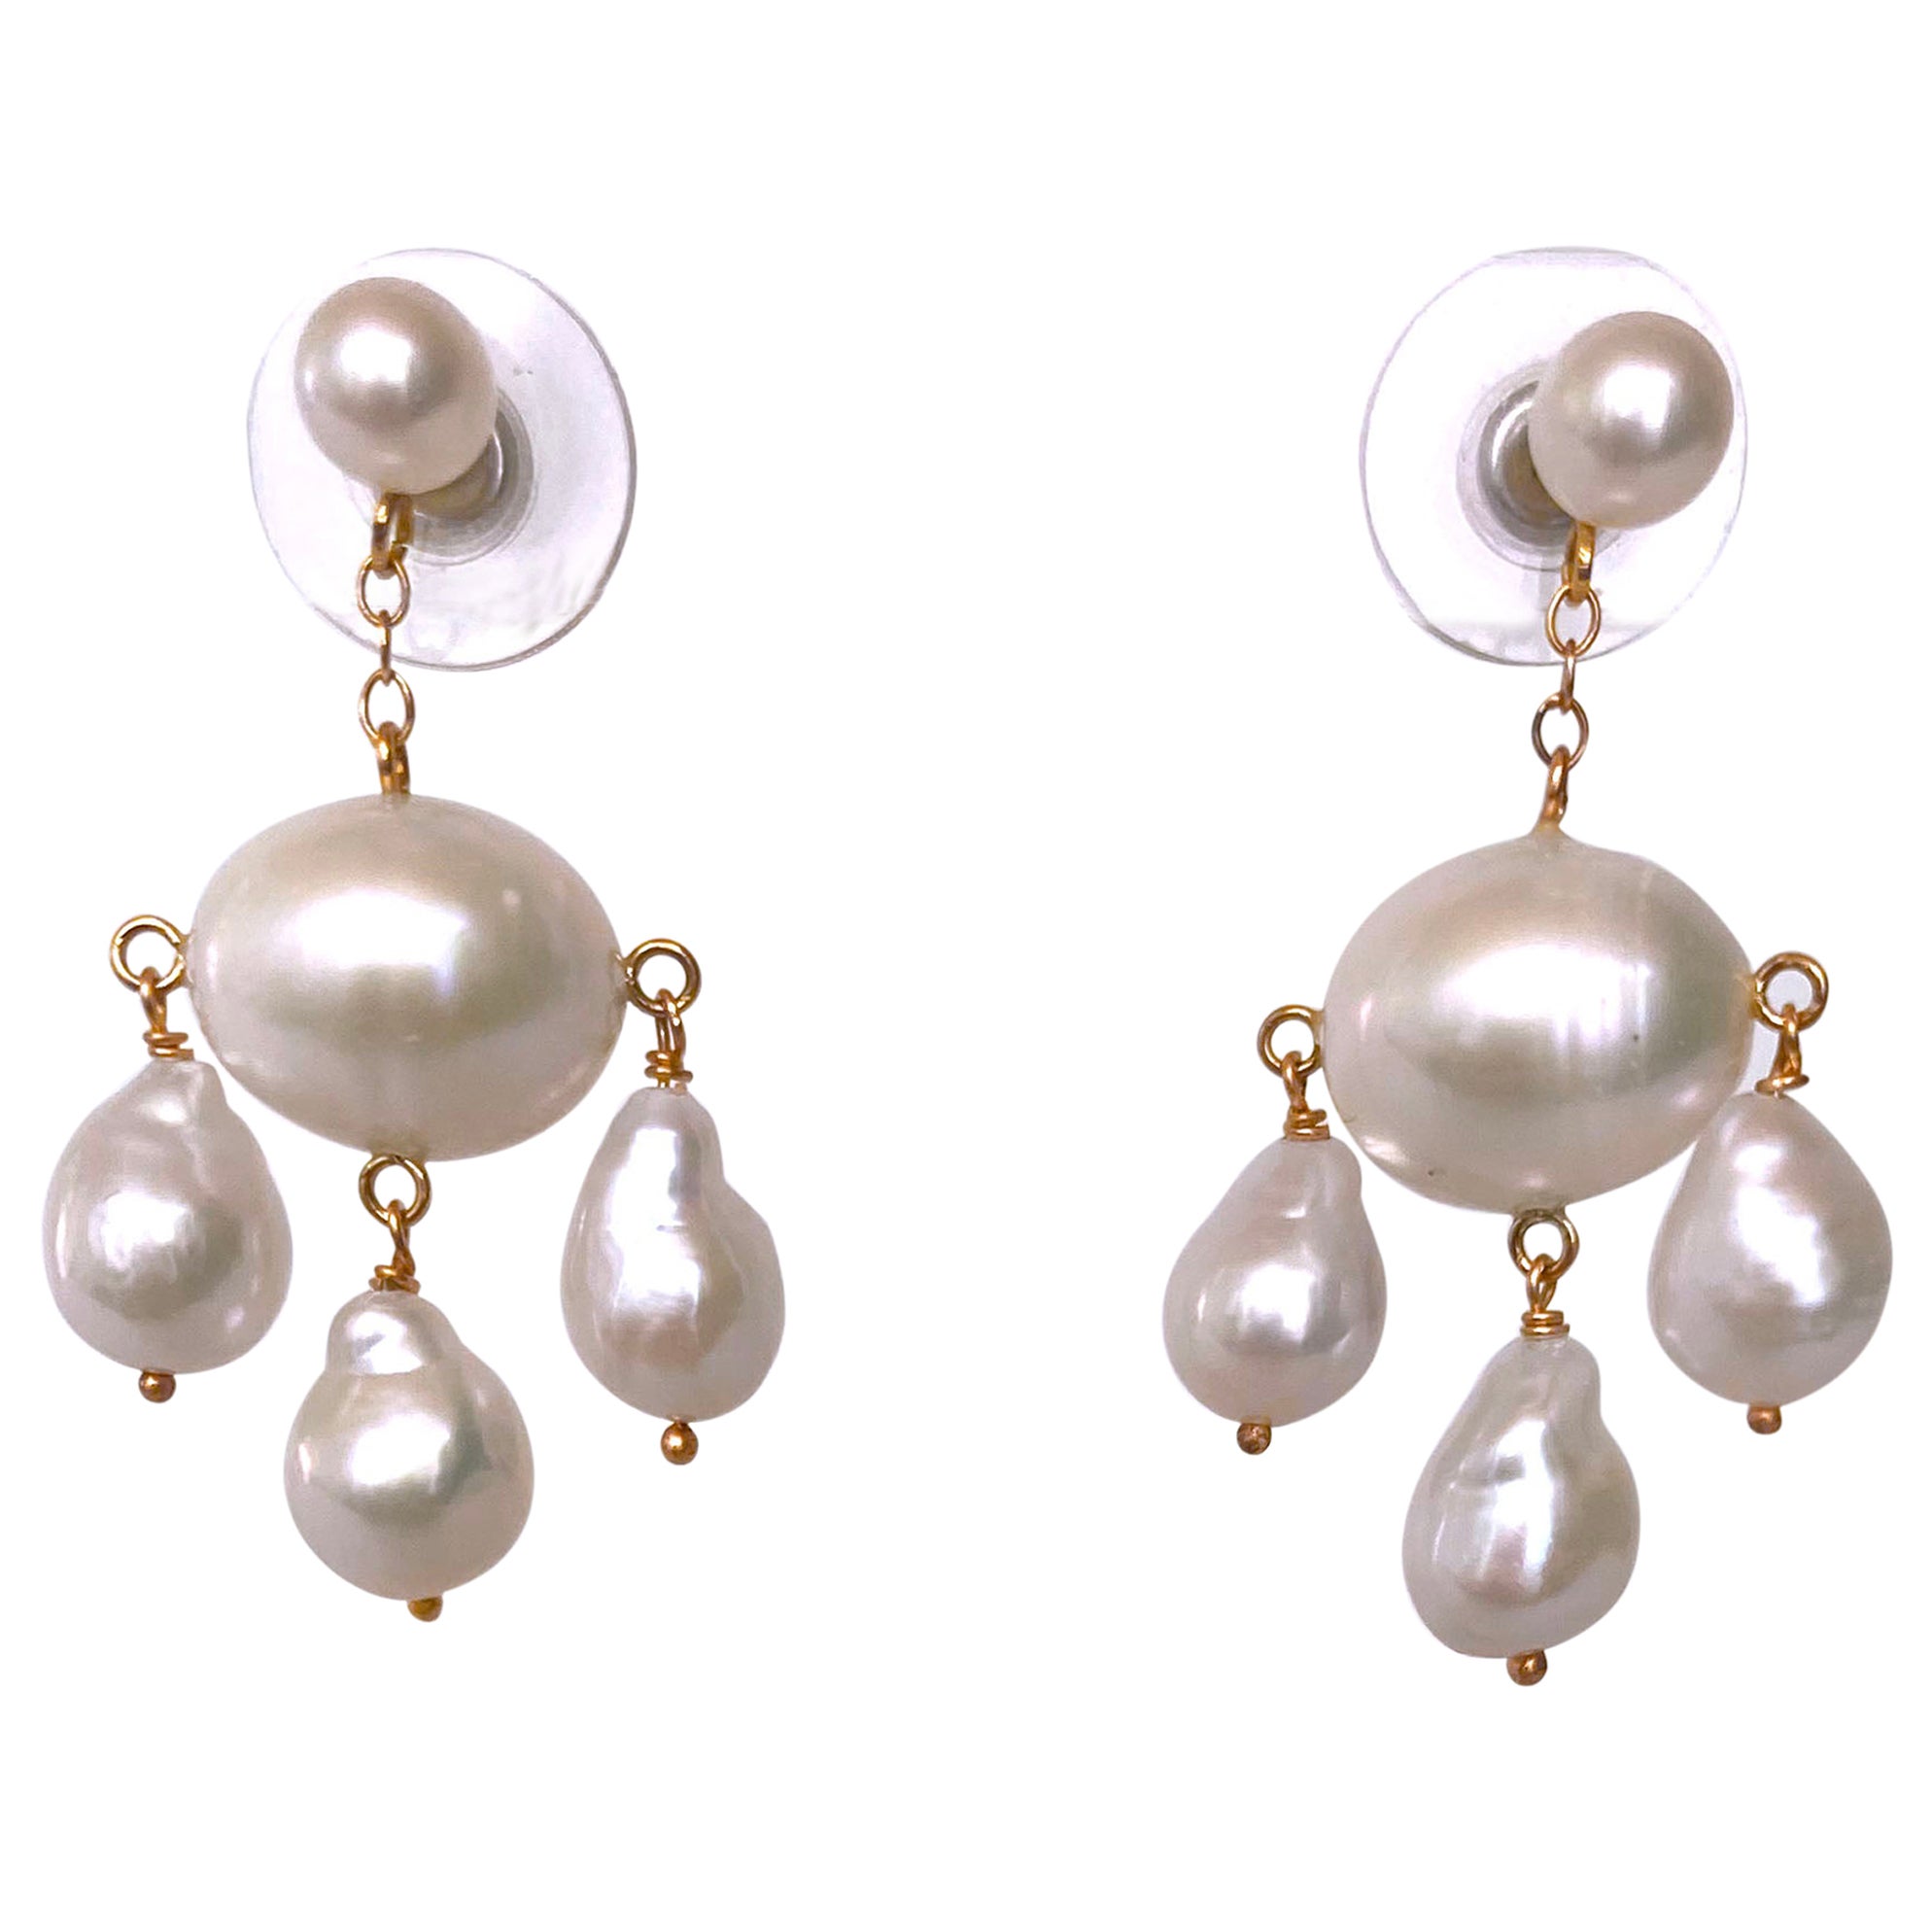 Marina J. Chandelier Baroque Pearl Earrings with 14k Yellow Gold